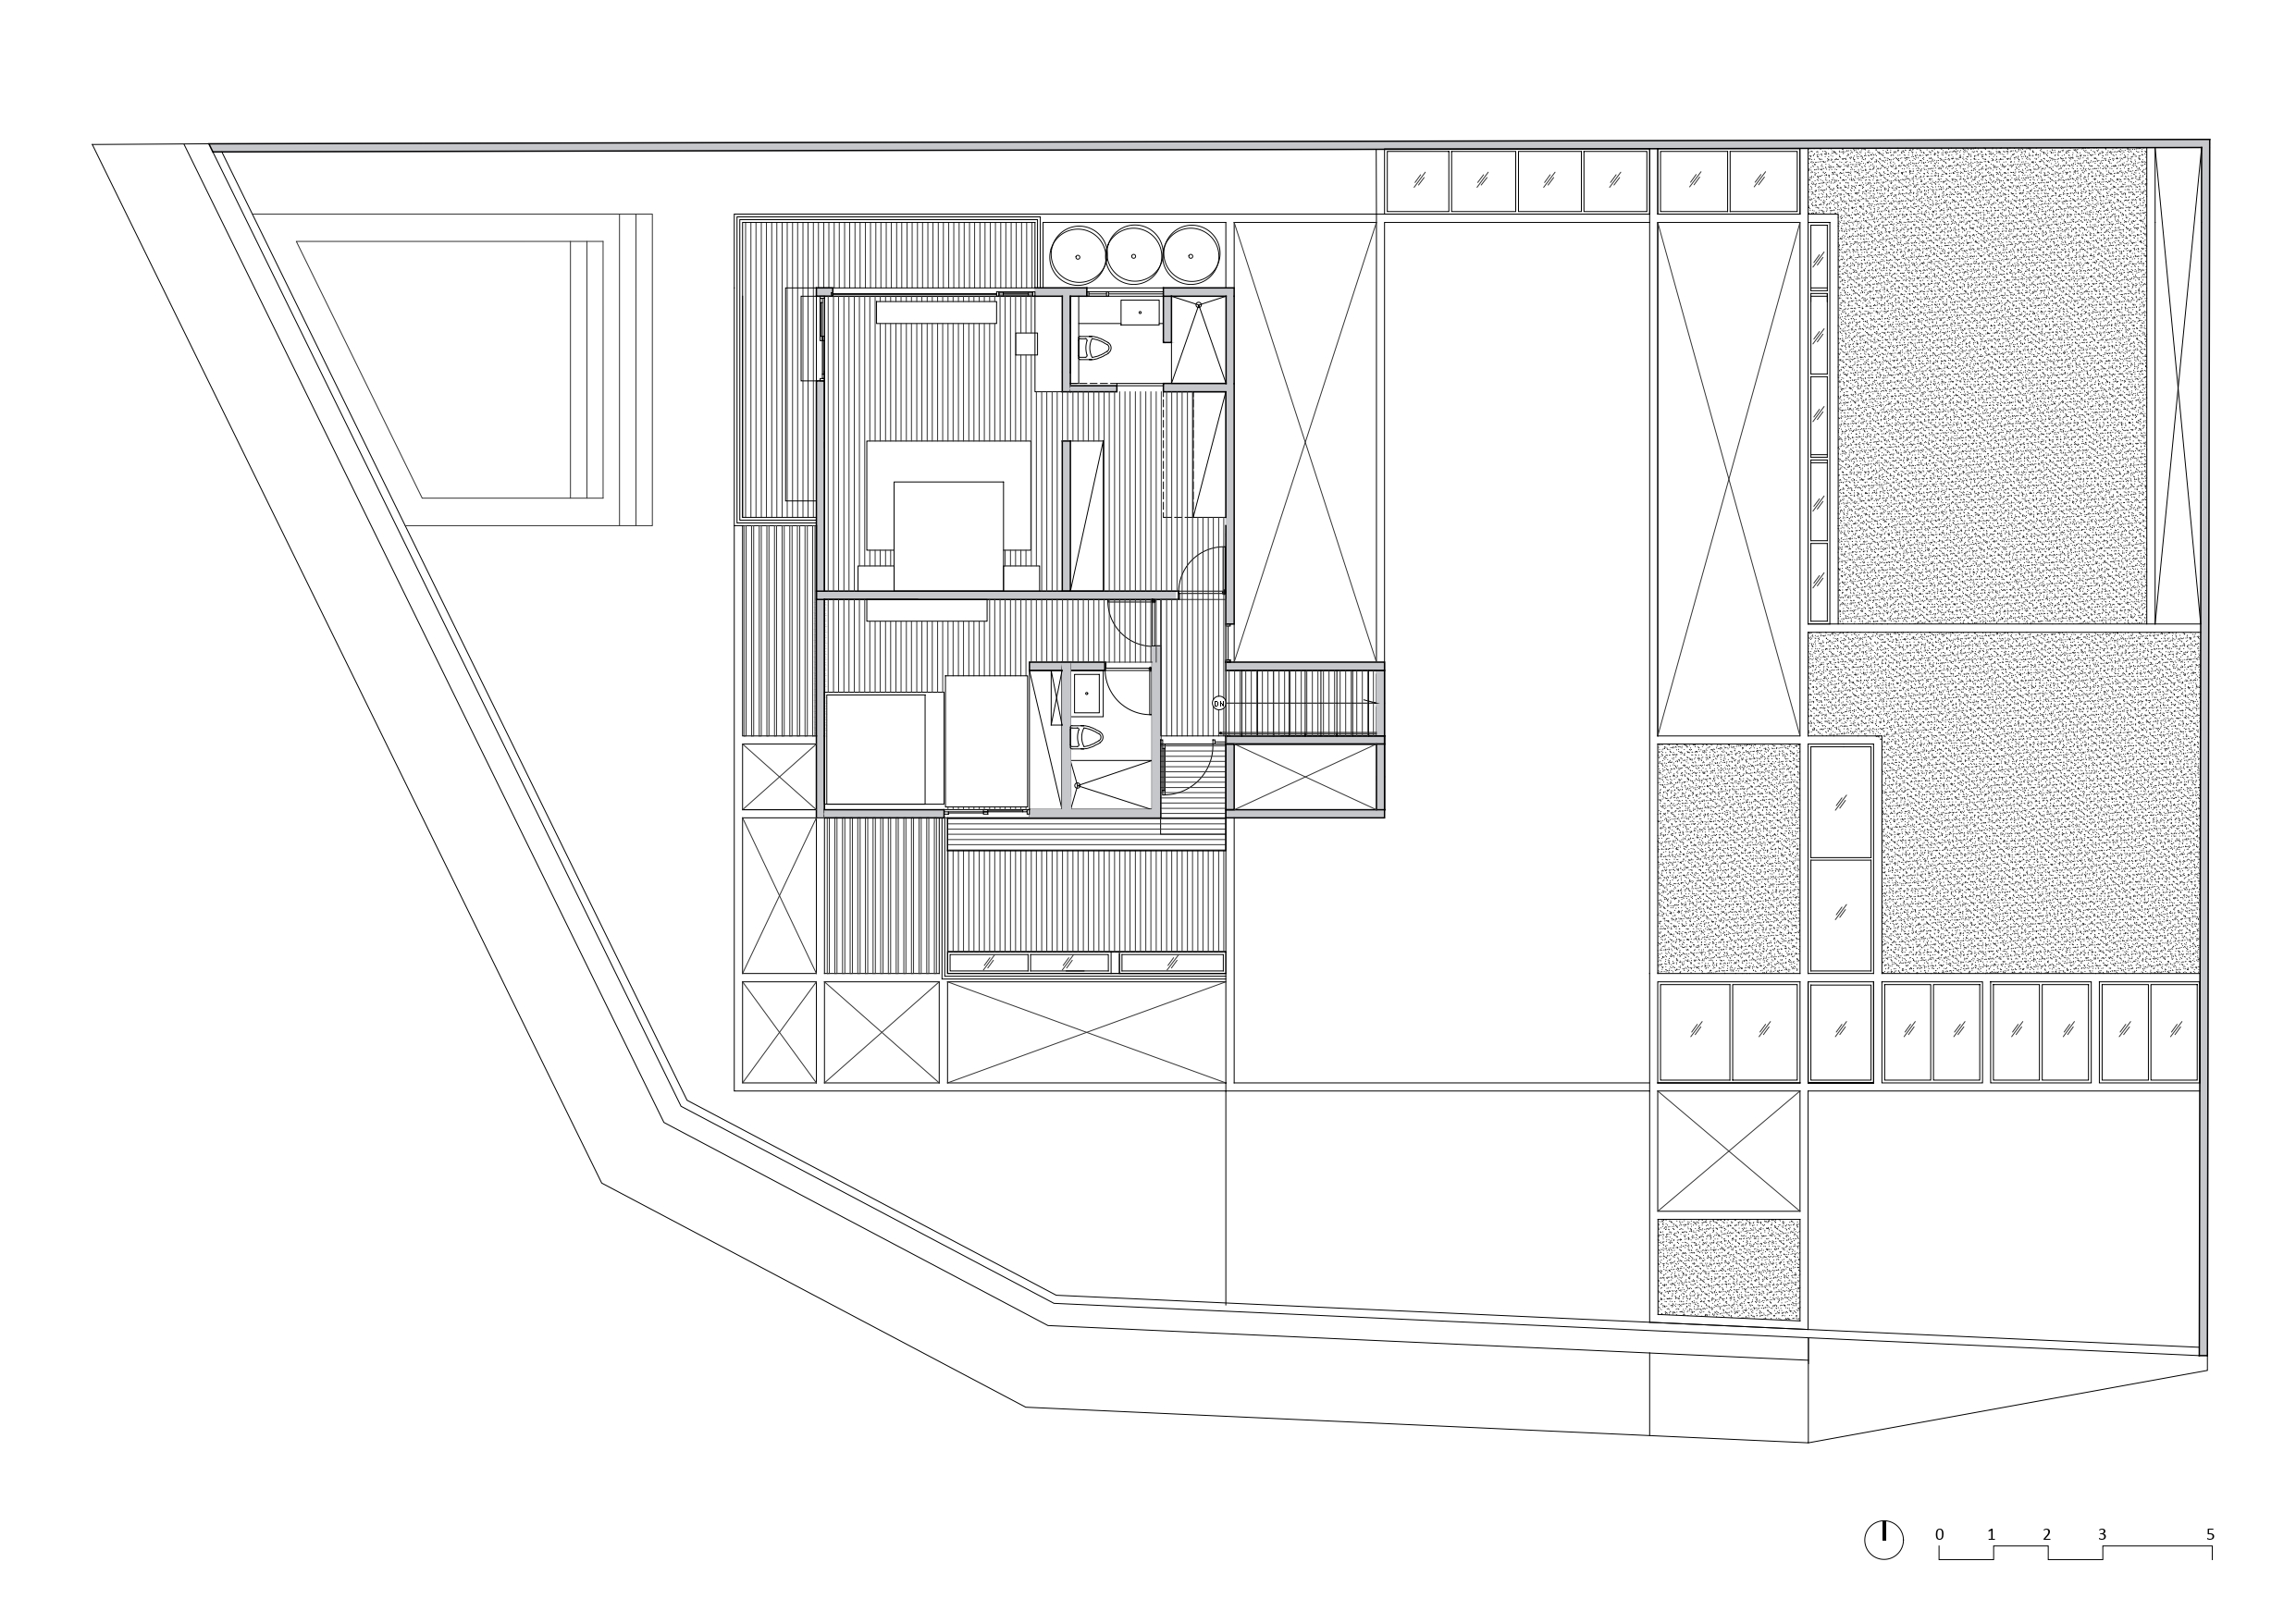 Second floor plan page